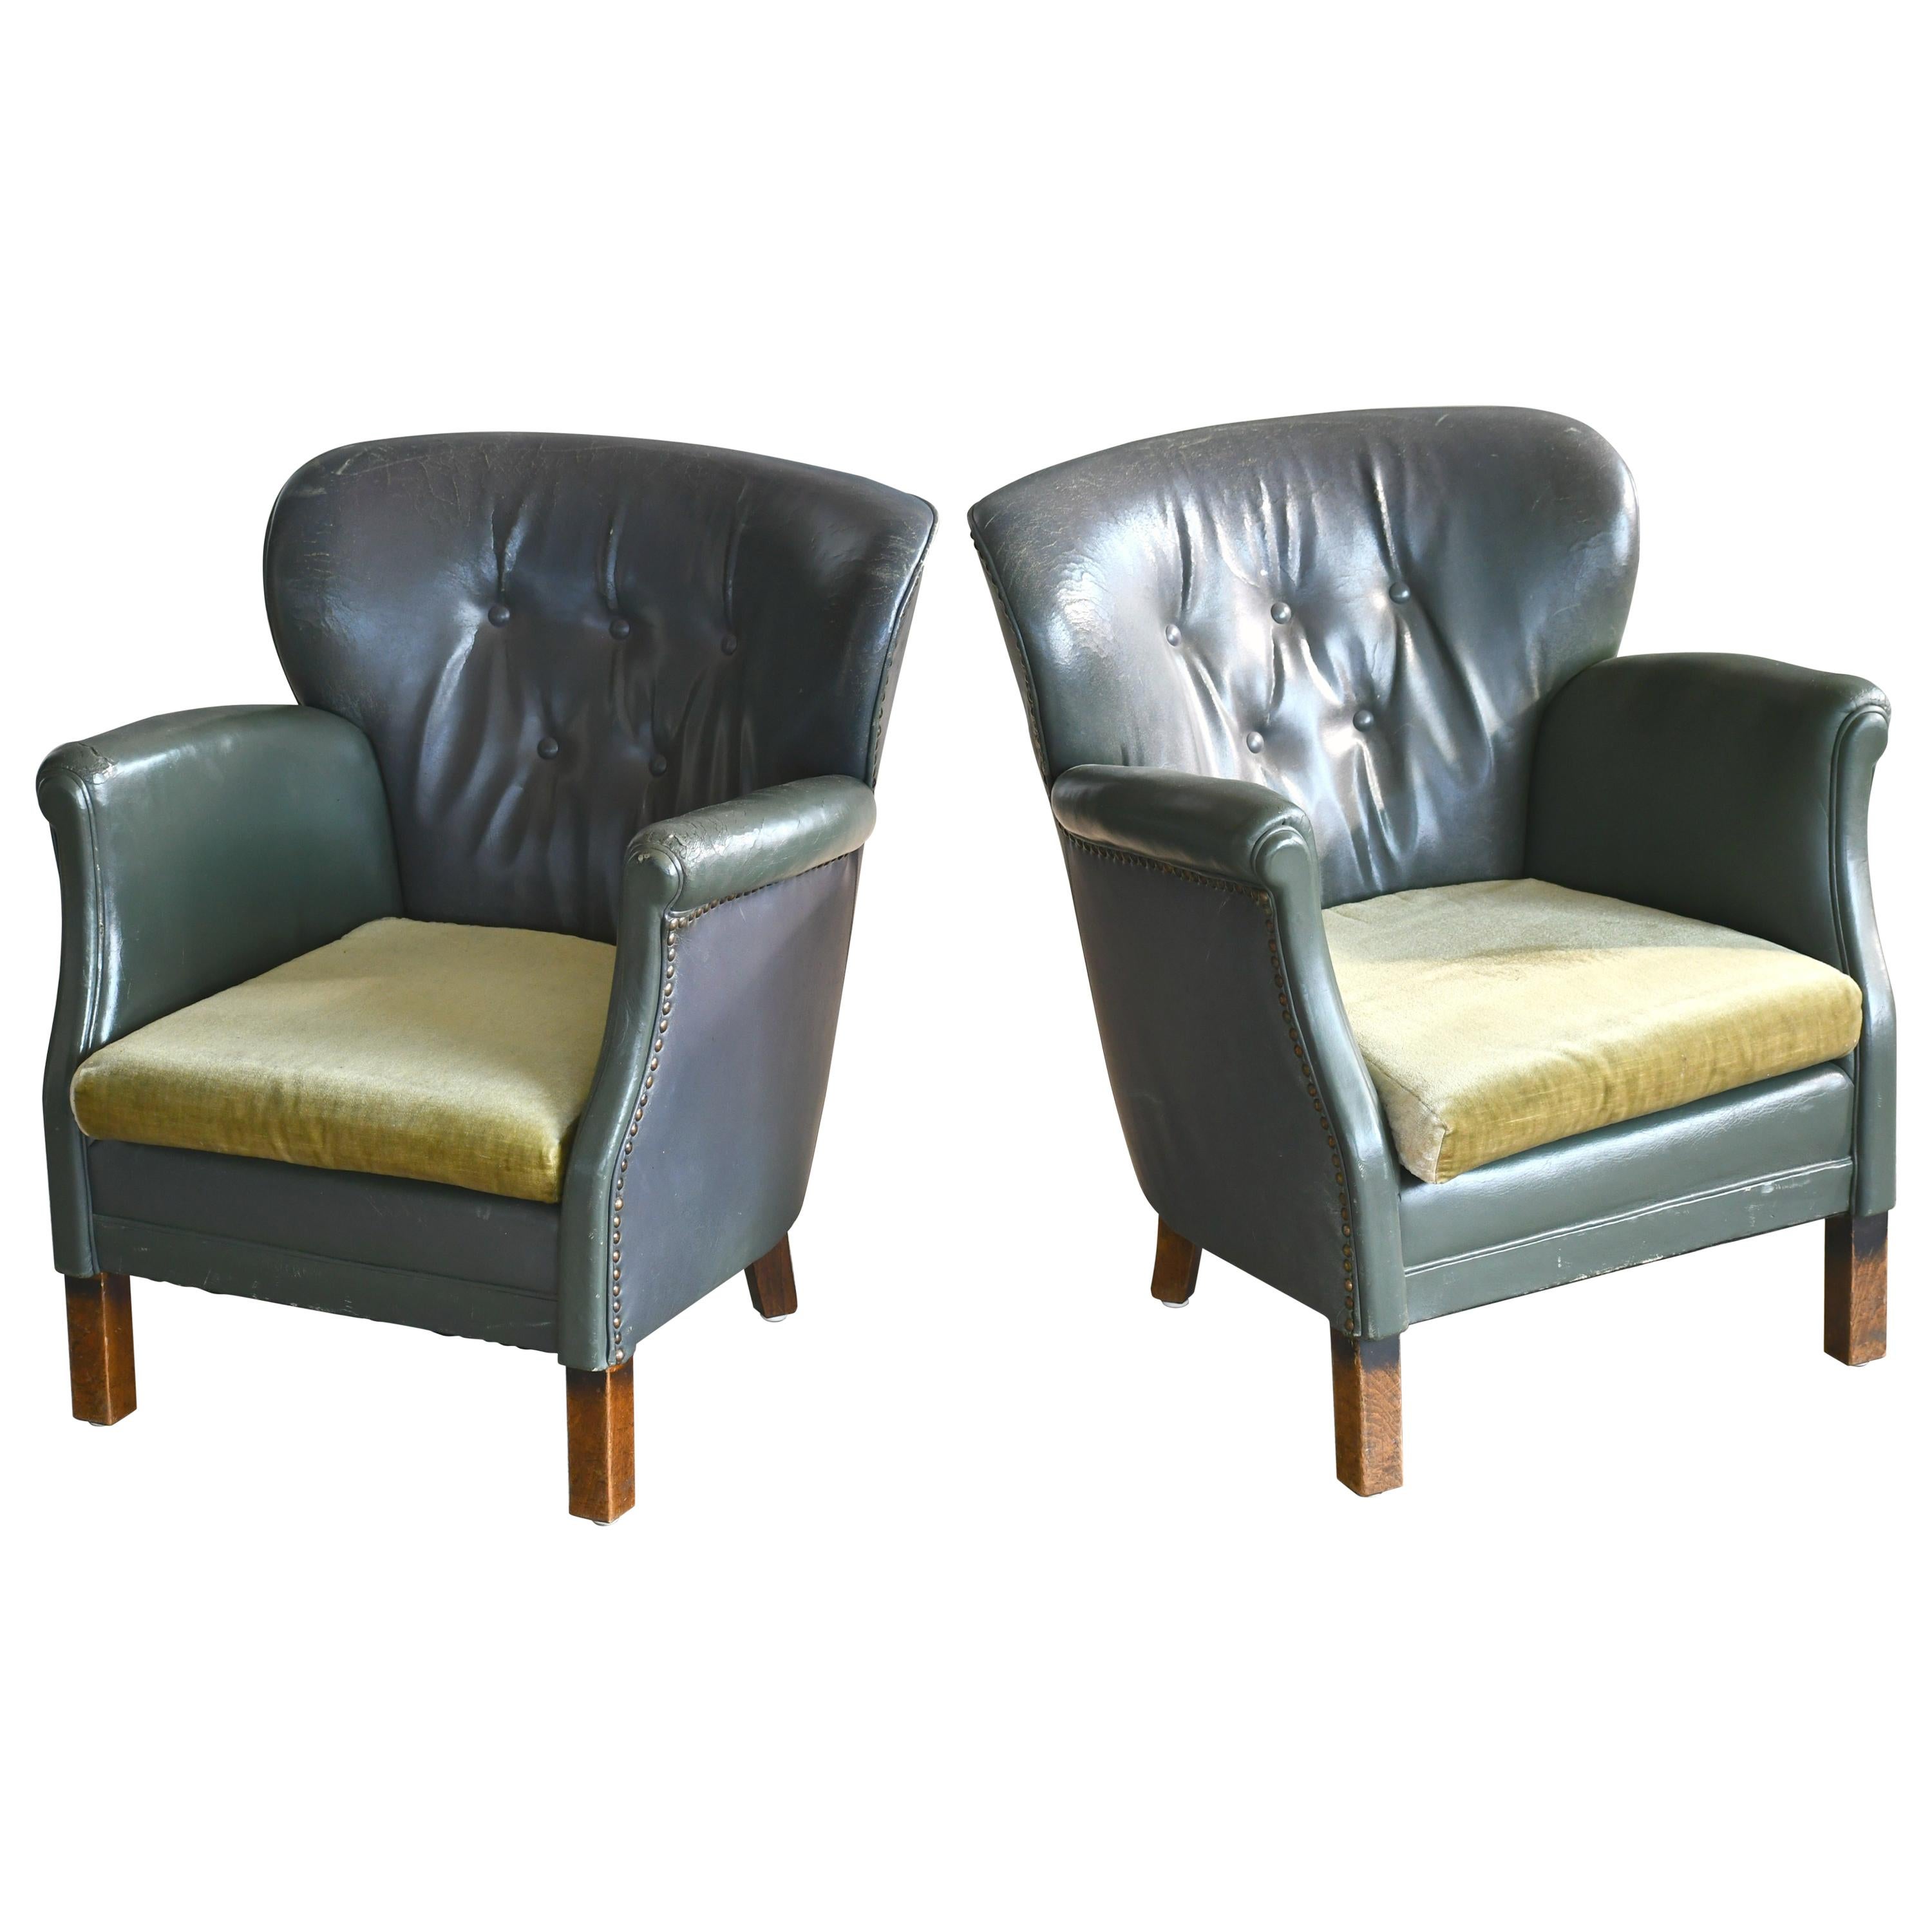 Pair of Classic Danish Club Chairs in Green Leather by Oskar Hansen